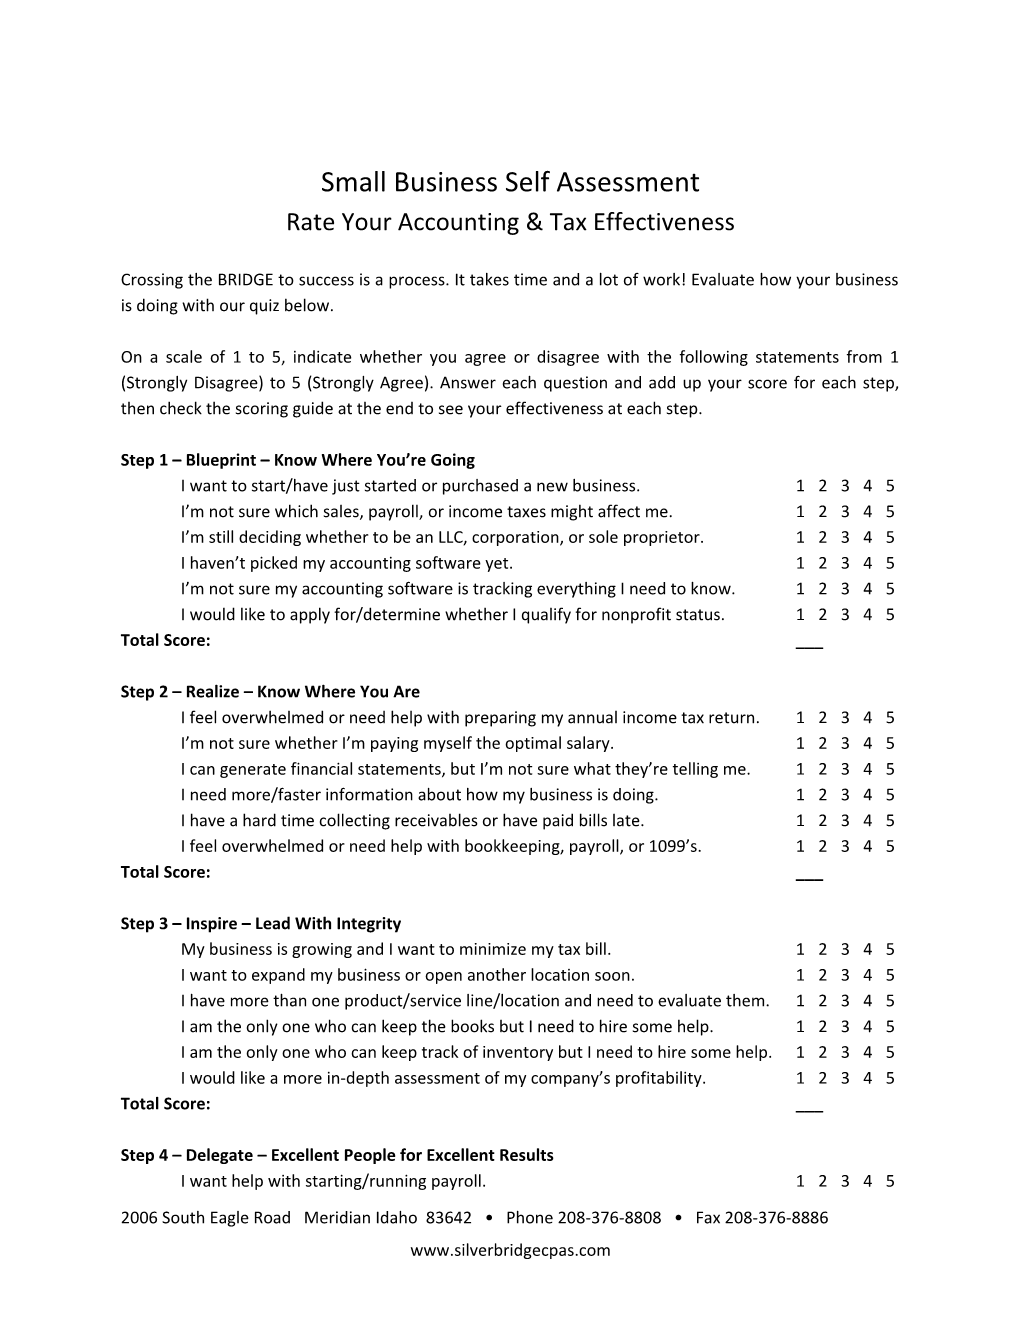 Small Business Self Assessment